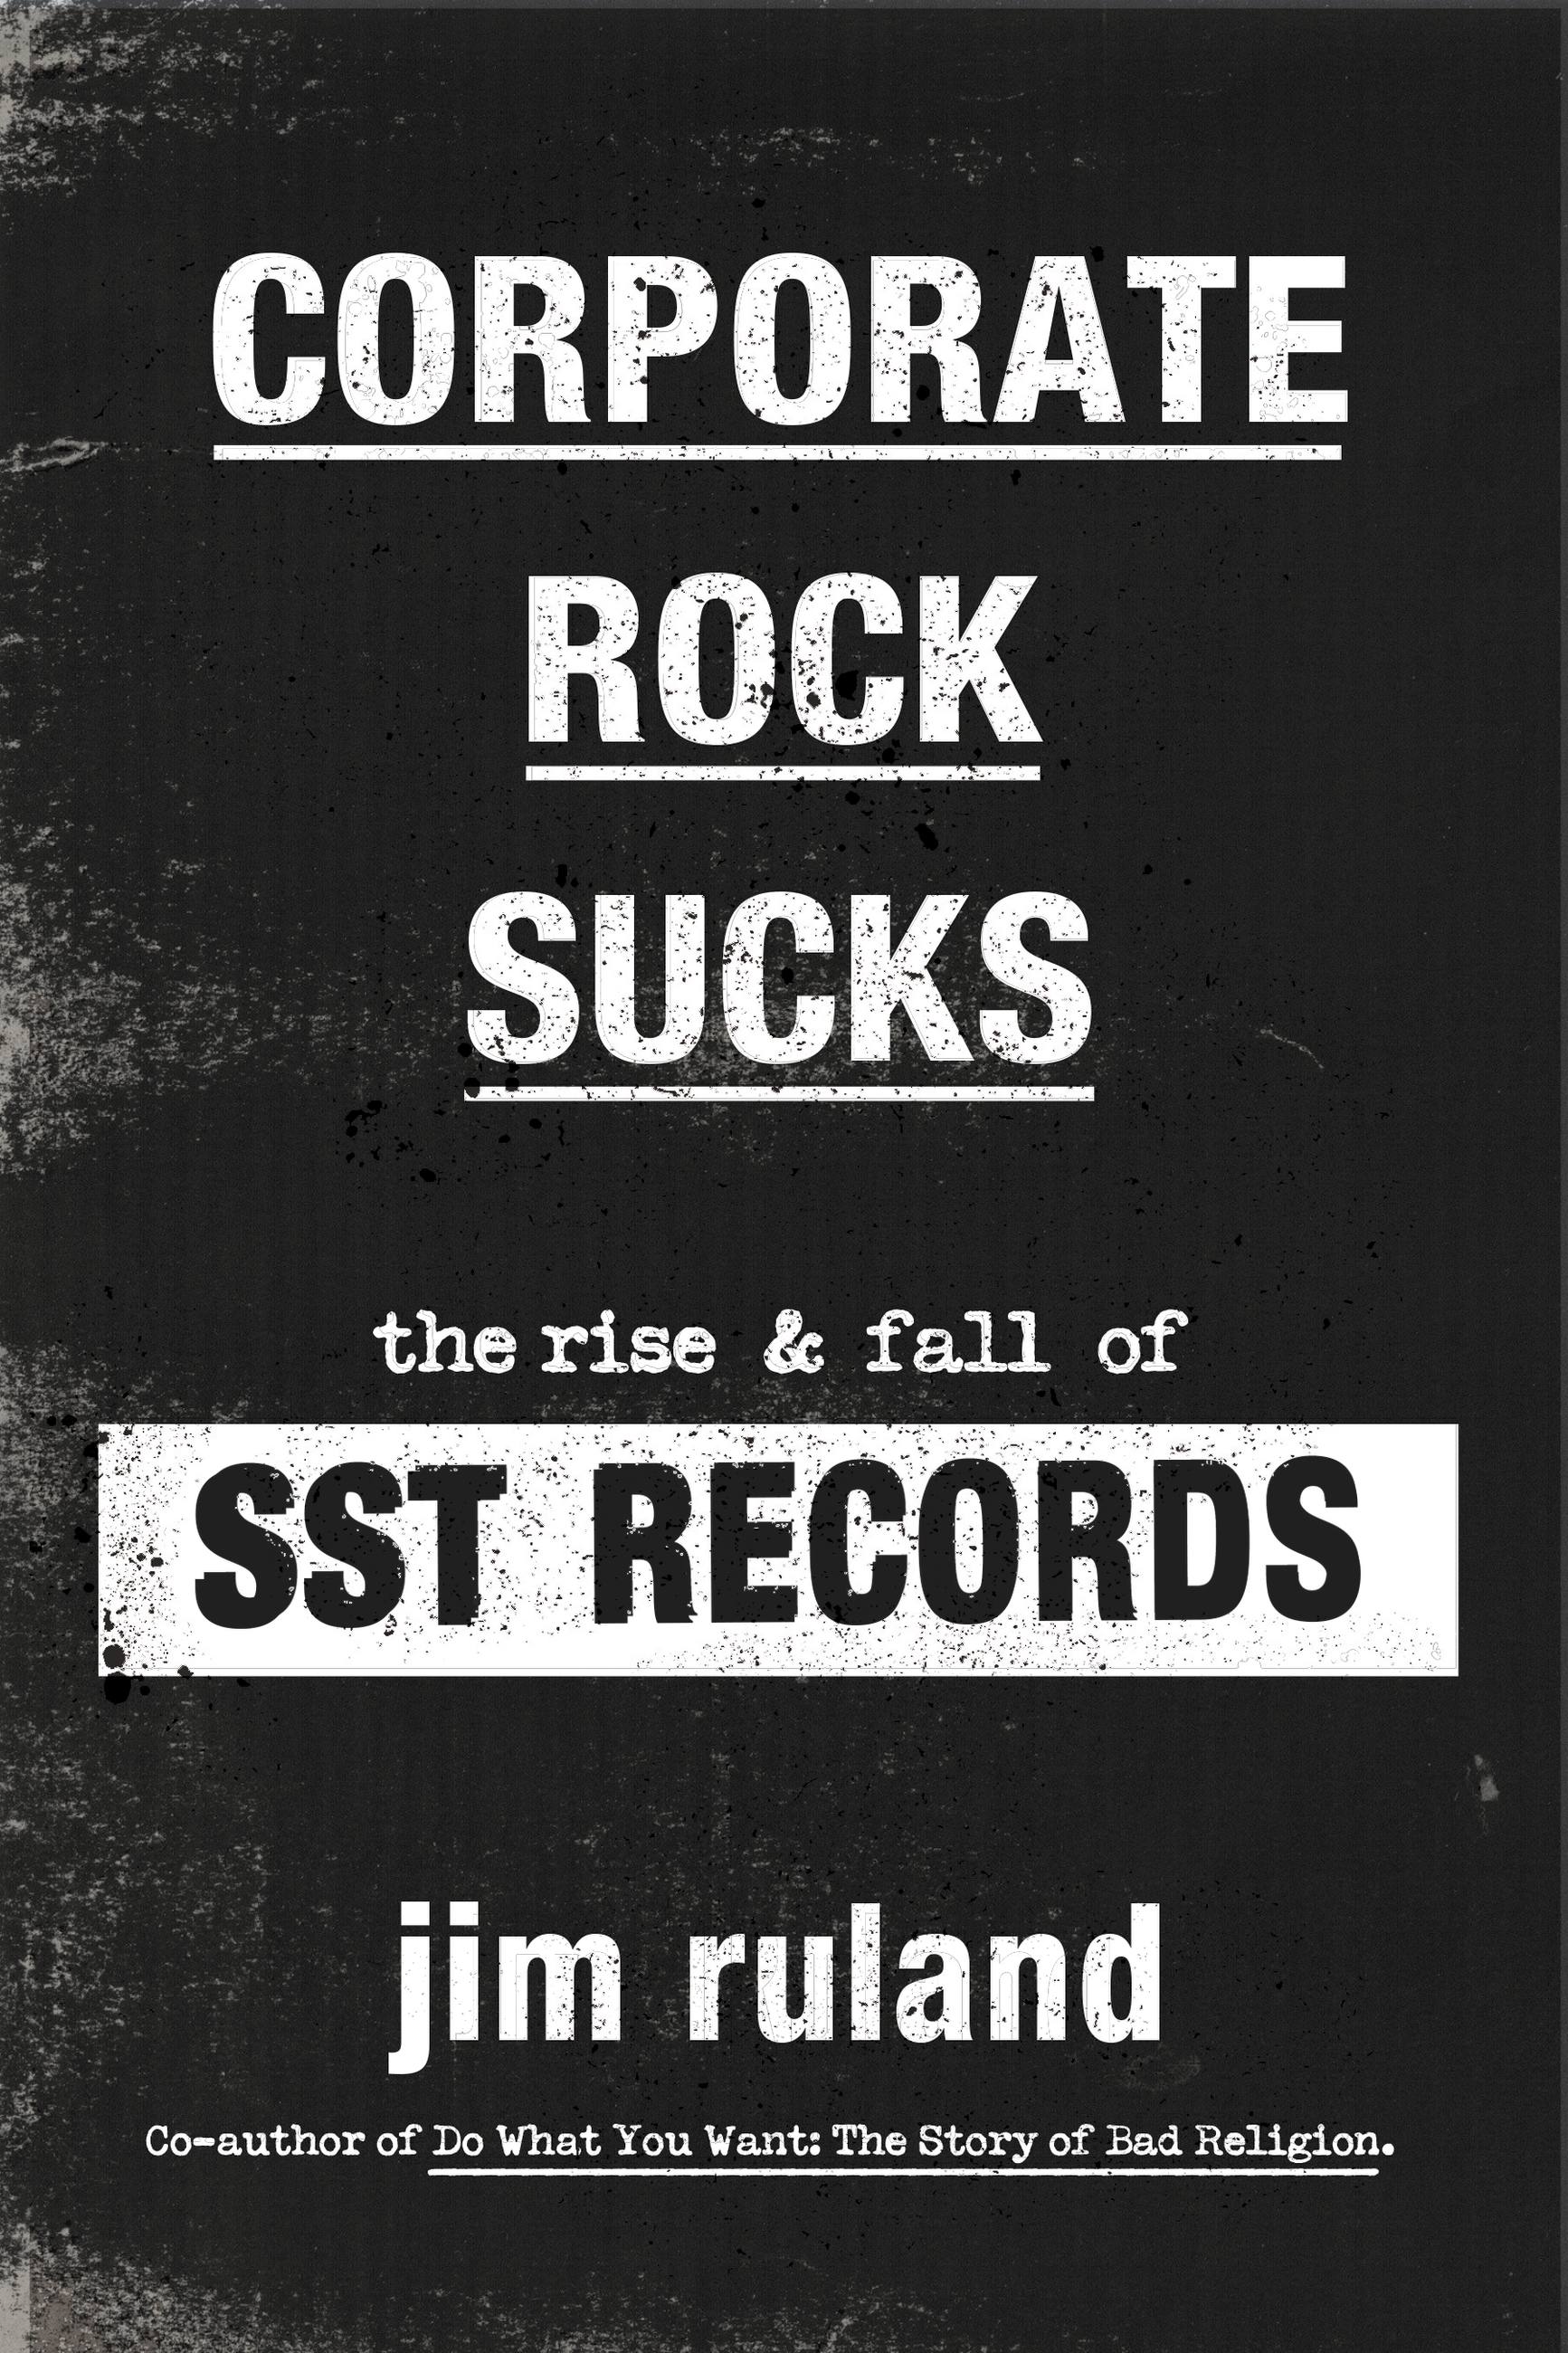 Corporate Rock Sucks by Jim Ruland Hachette Book Group image photo